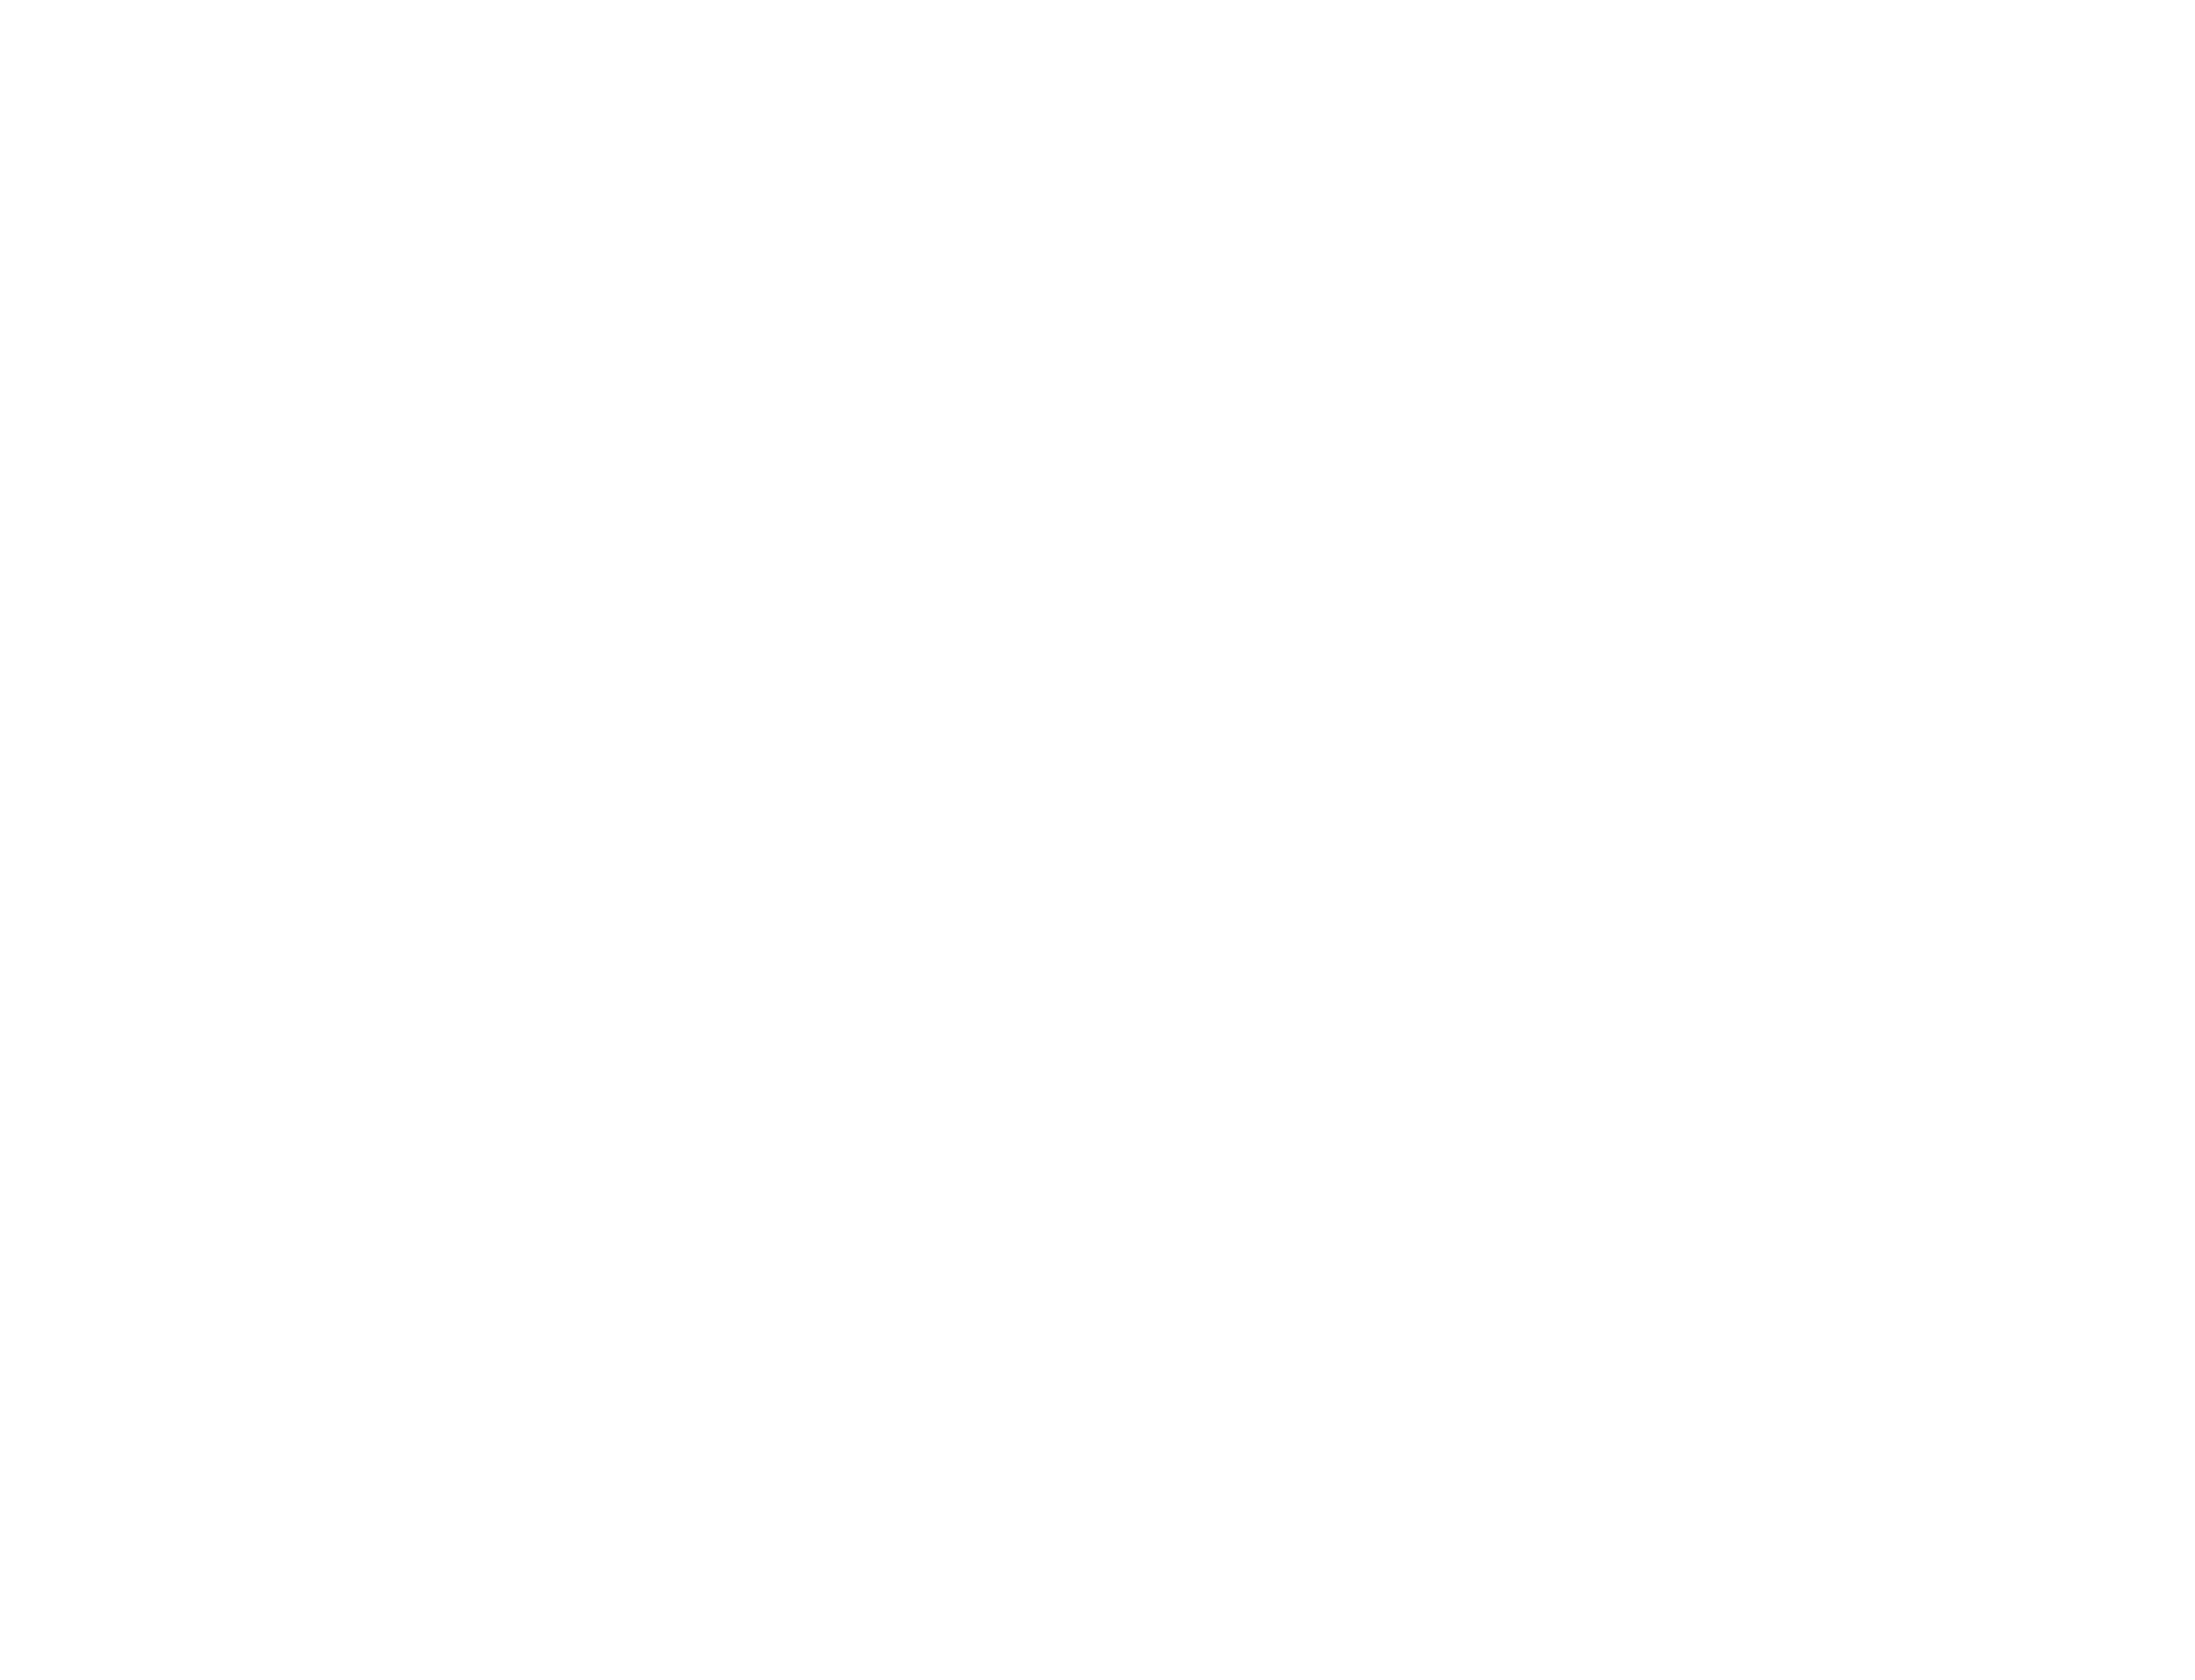 Questech logo in white on a black background